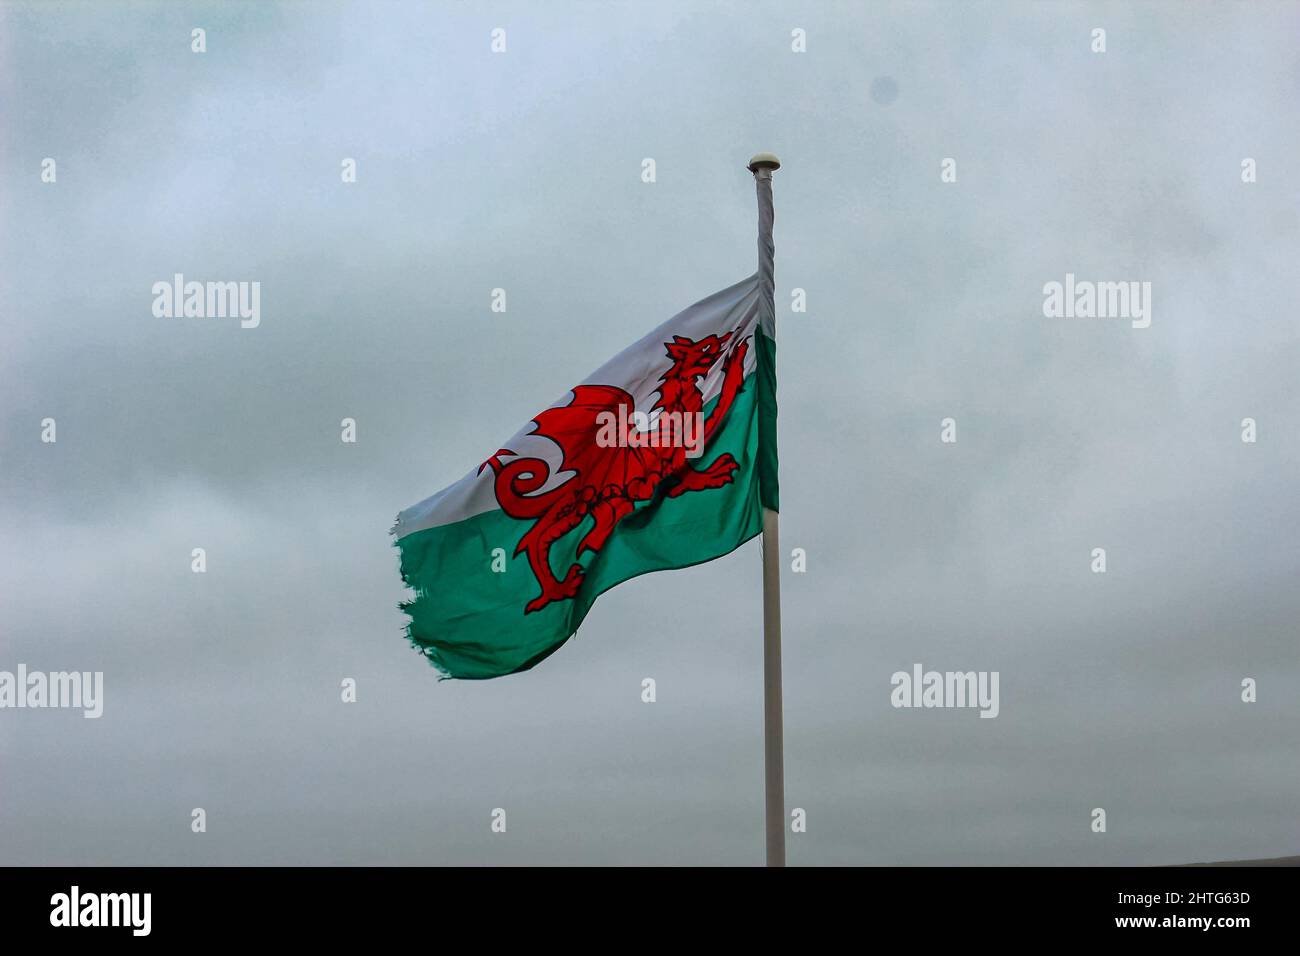 Dark image of the Welsh flag on a pole on a cloudy day in New Quay, Wales Stock Photo